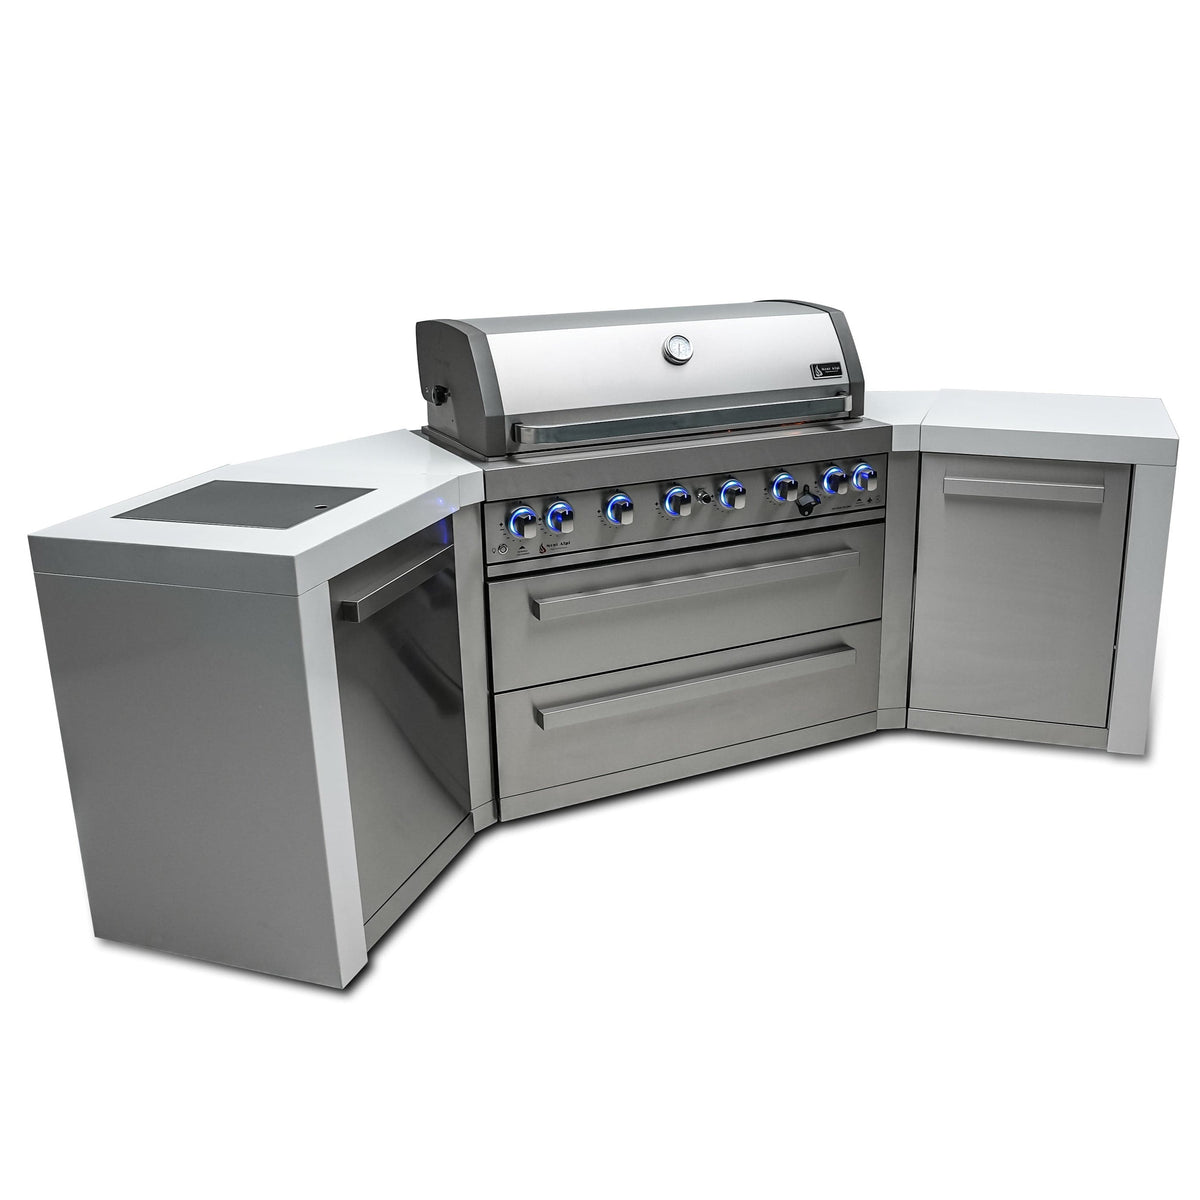 Mont Alpi Islands Mont Alpi 805 Deluxe Island with Two 45 Degree Corners/ 6-Burner Grill, 2 Infrared Burners, Stainless Steel / MAi805-D45